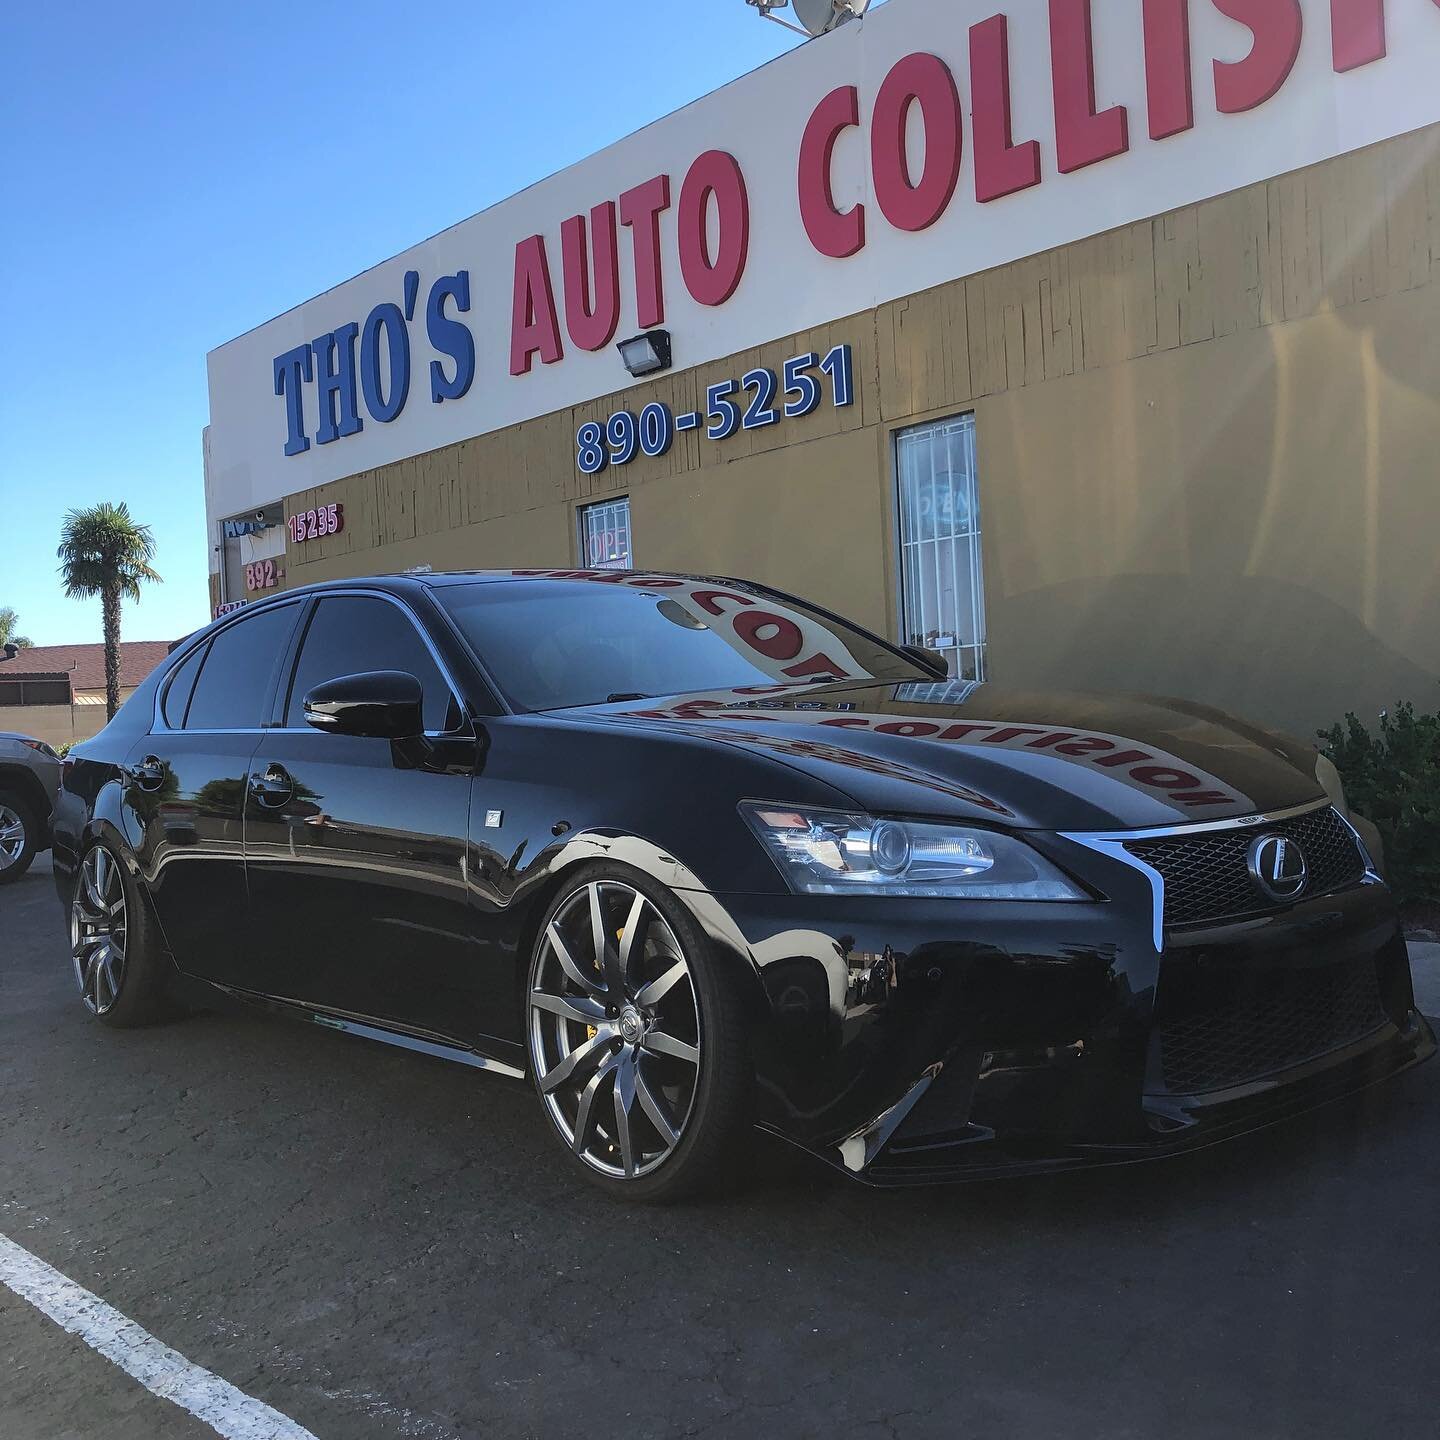 She&rsquo;s been here a few times, but you wouldn&rsquo;t know it 😏 #LexusGs350 #MadeSureOwnerRaisedItUp #BecauseSheUsuallySitsMuchLower #slammed #Dep #thosautocollision #thosautobody